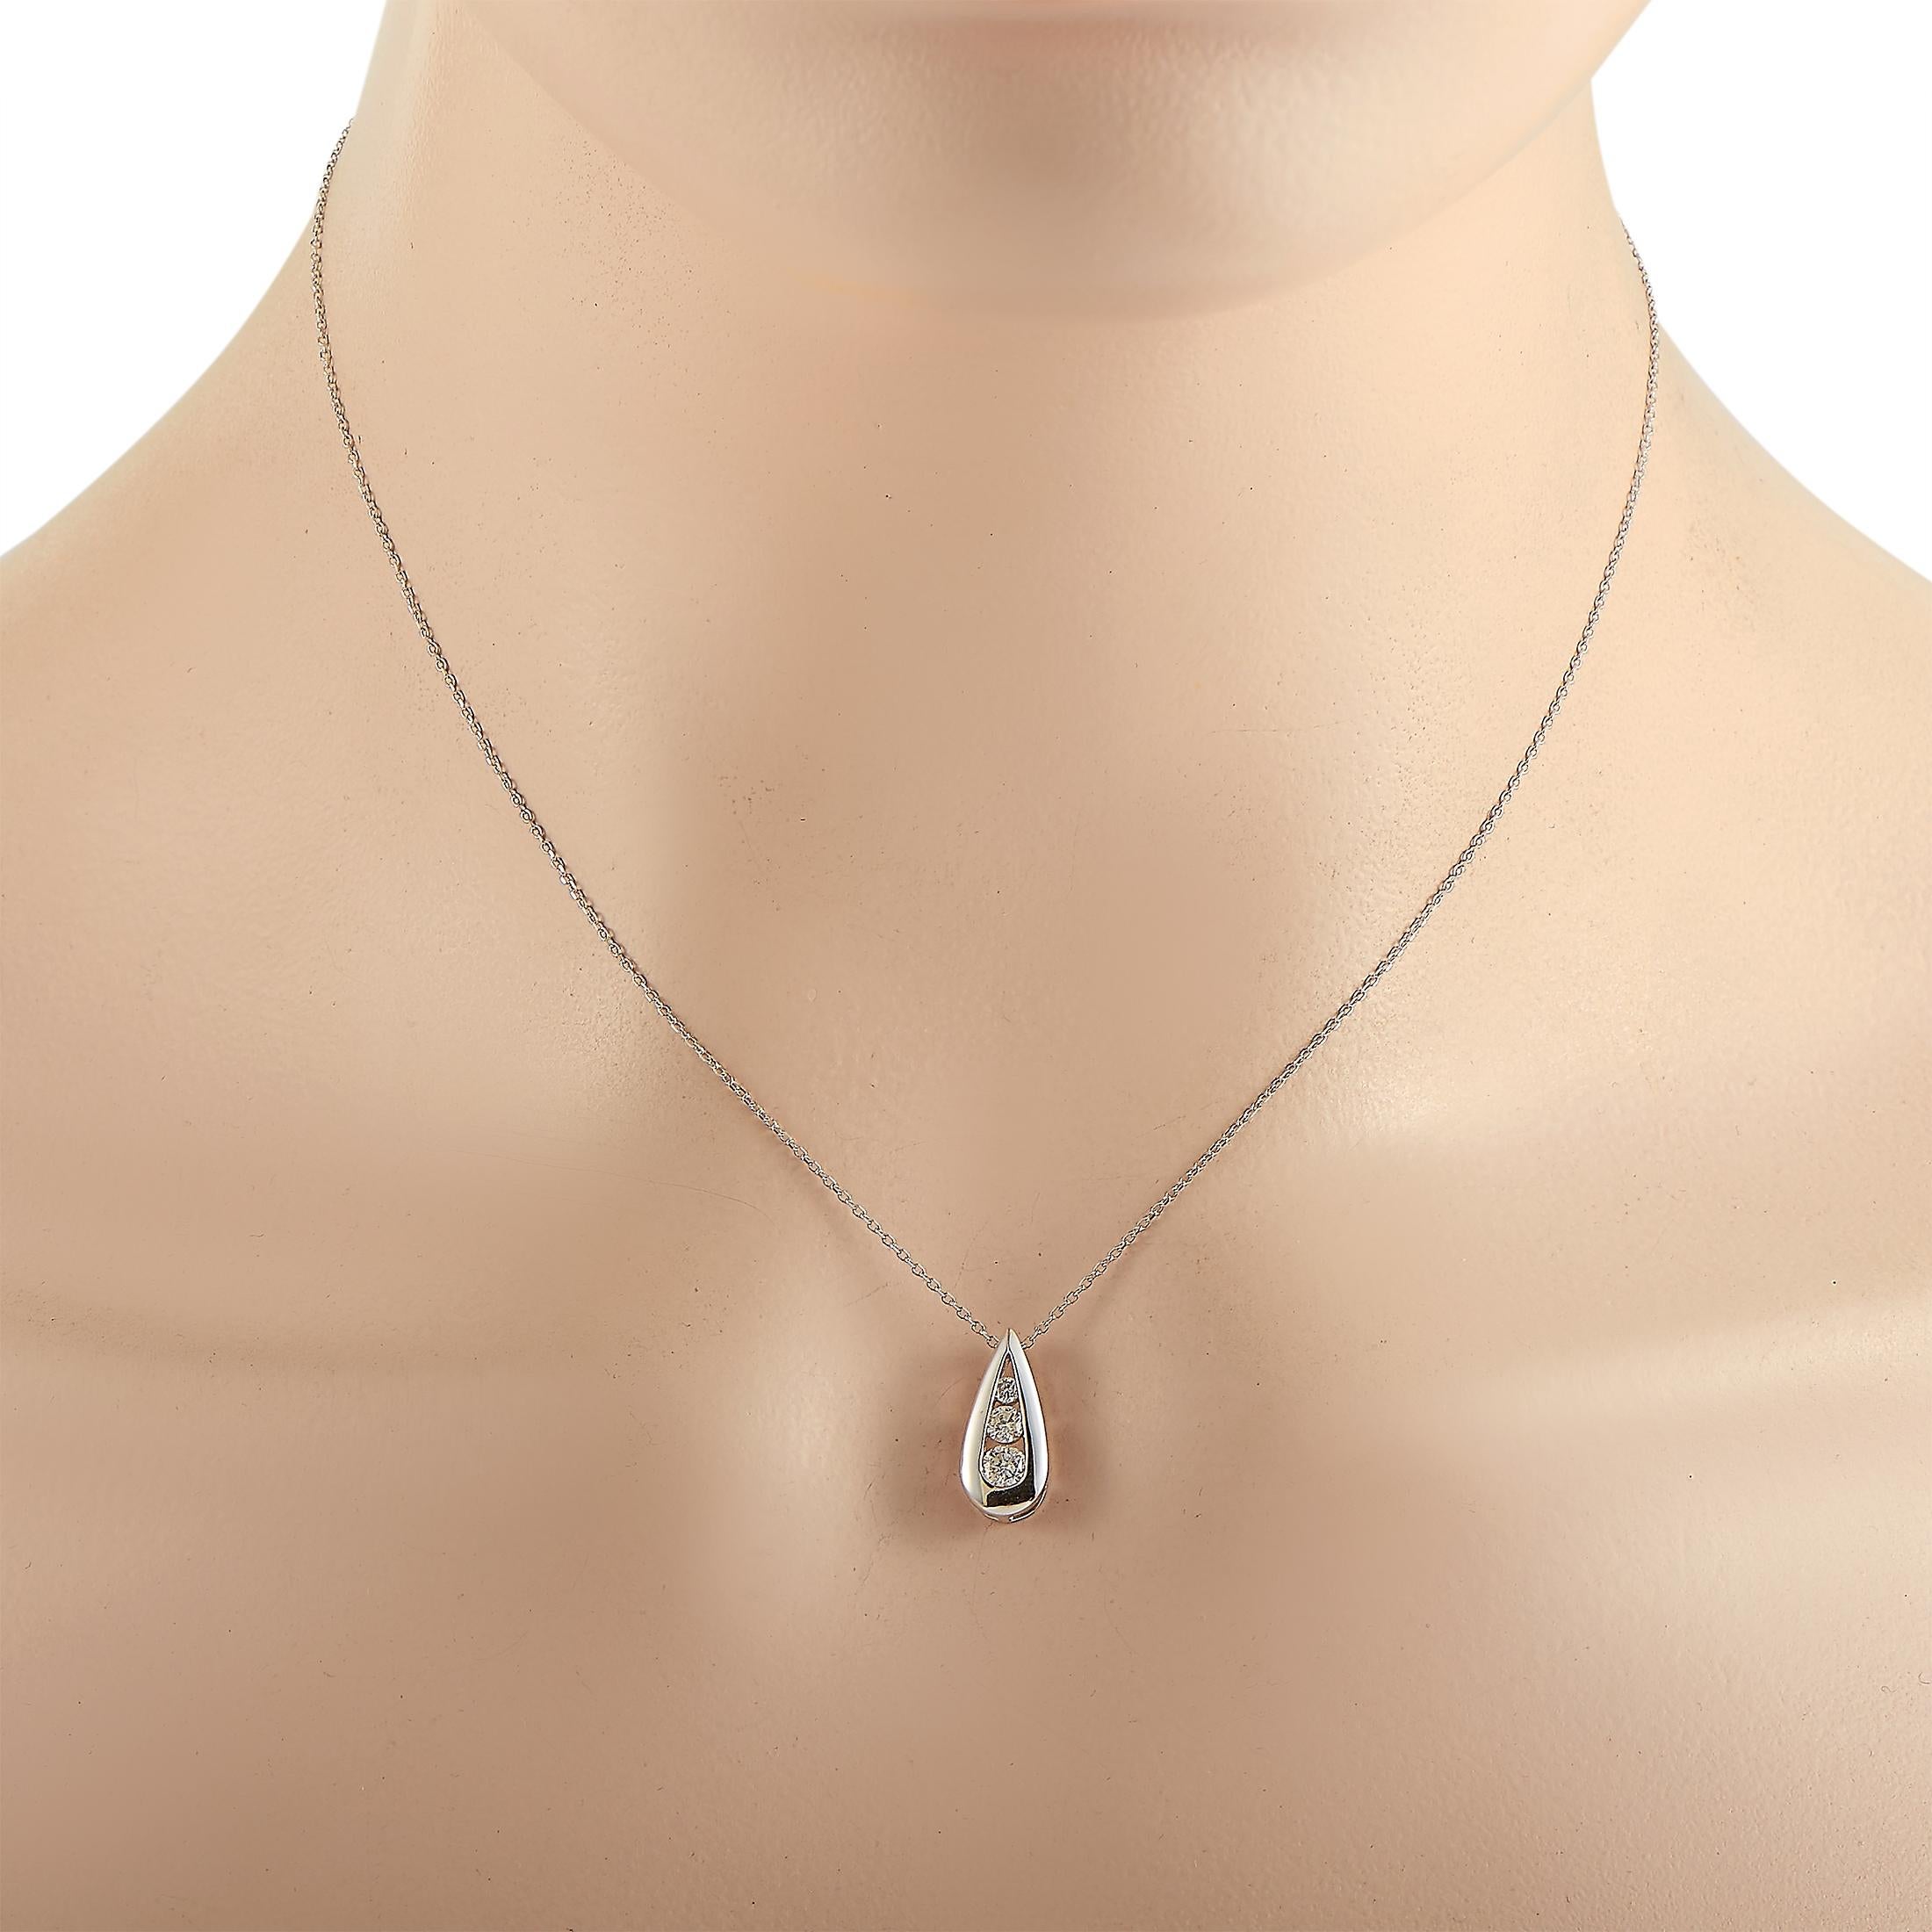 This LB Exclusive necklace is crafted from 14K white gold and weighs 2.6 grams. It is presented with a 16” chain and a pendant that measures 0.55” in length and 0.37” in width. The necklace is embellished with diamonds that total 0.35 carats.
 
